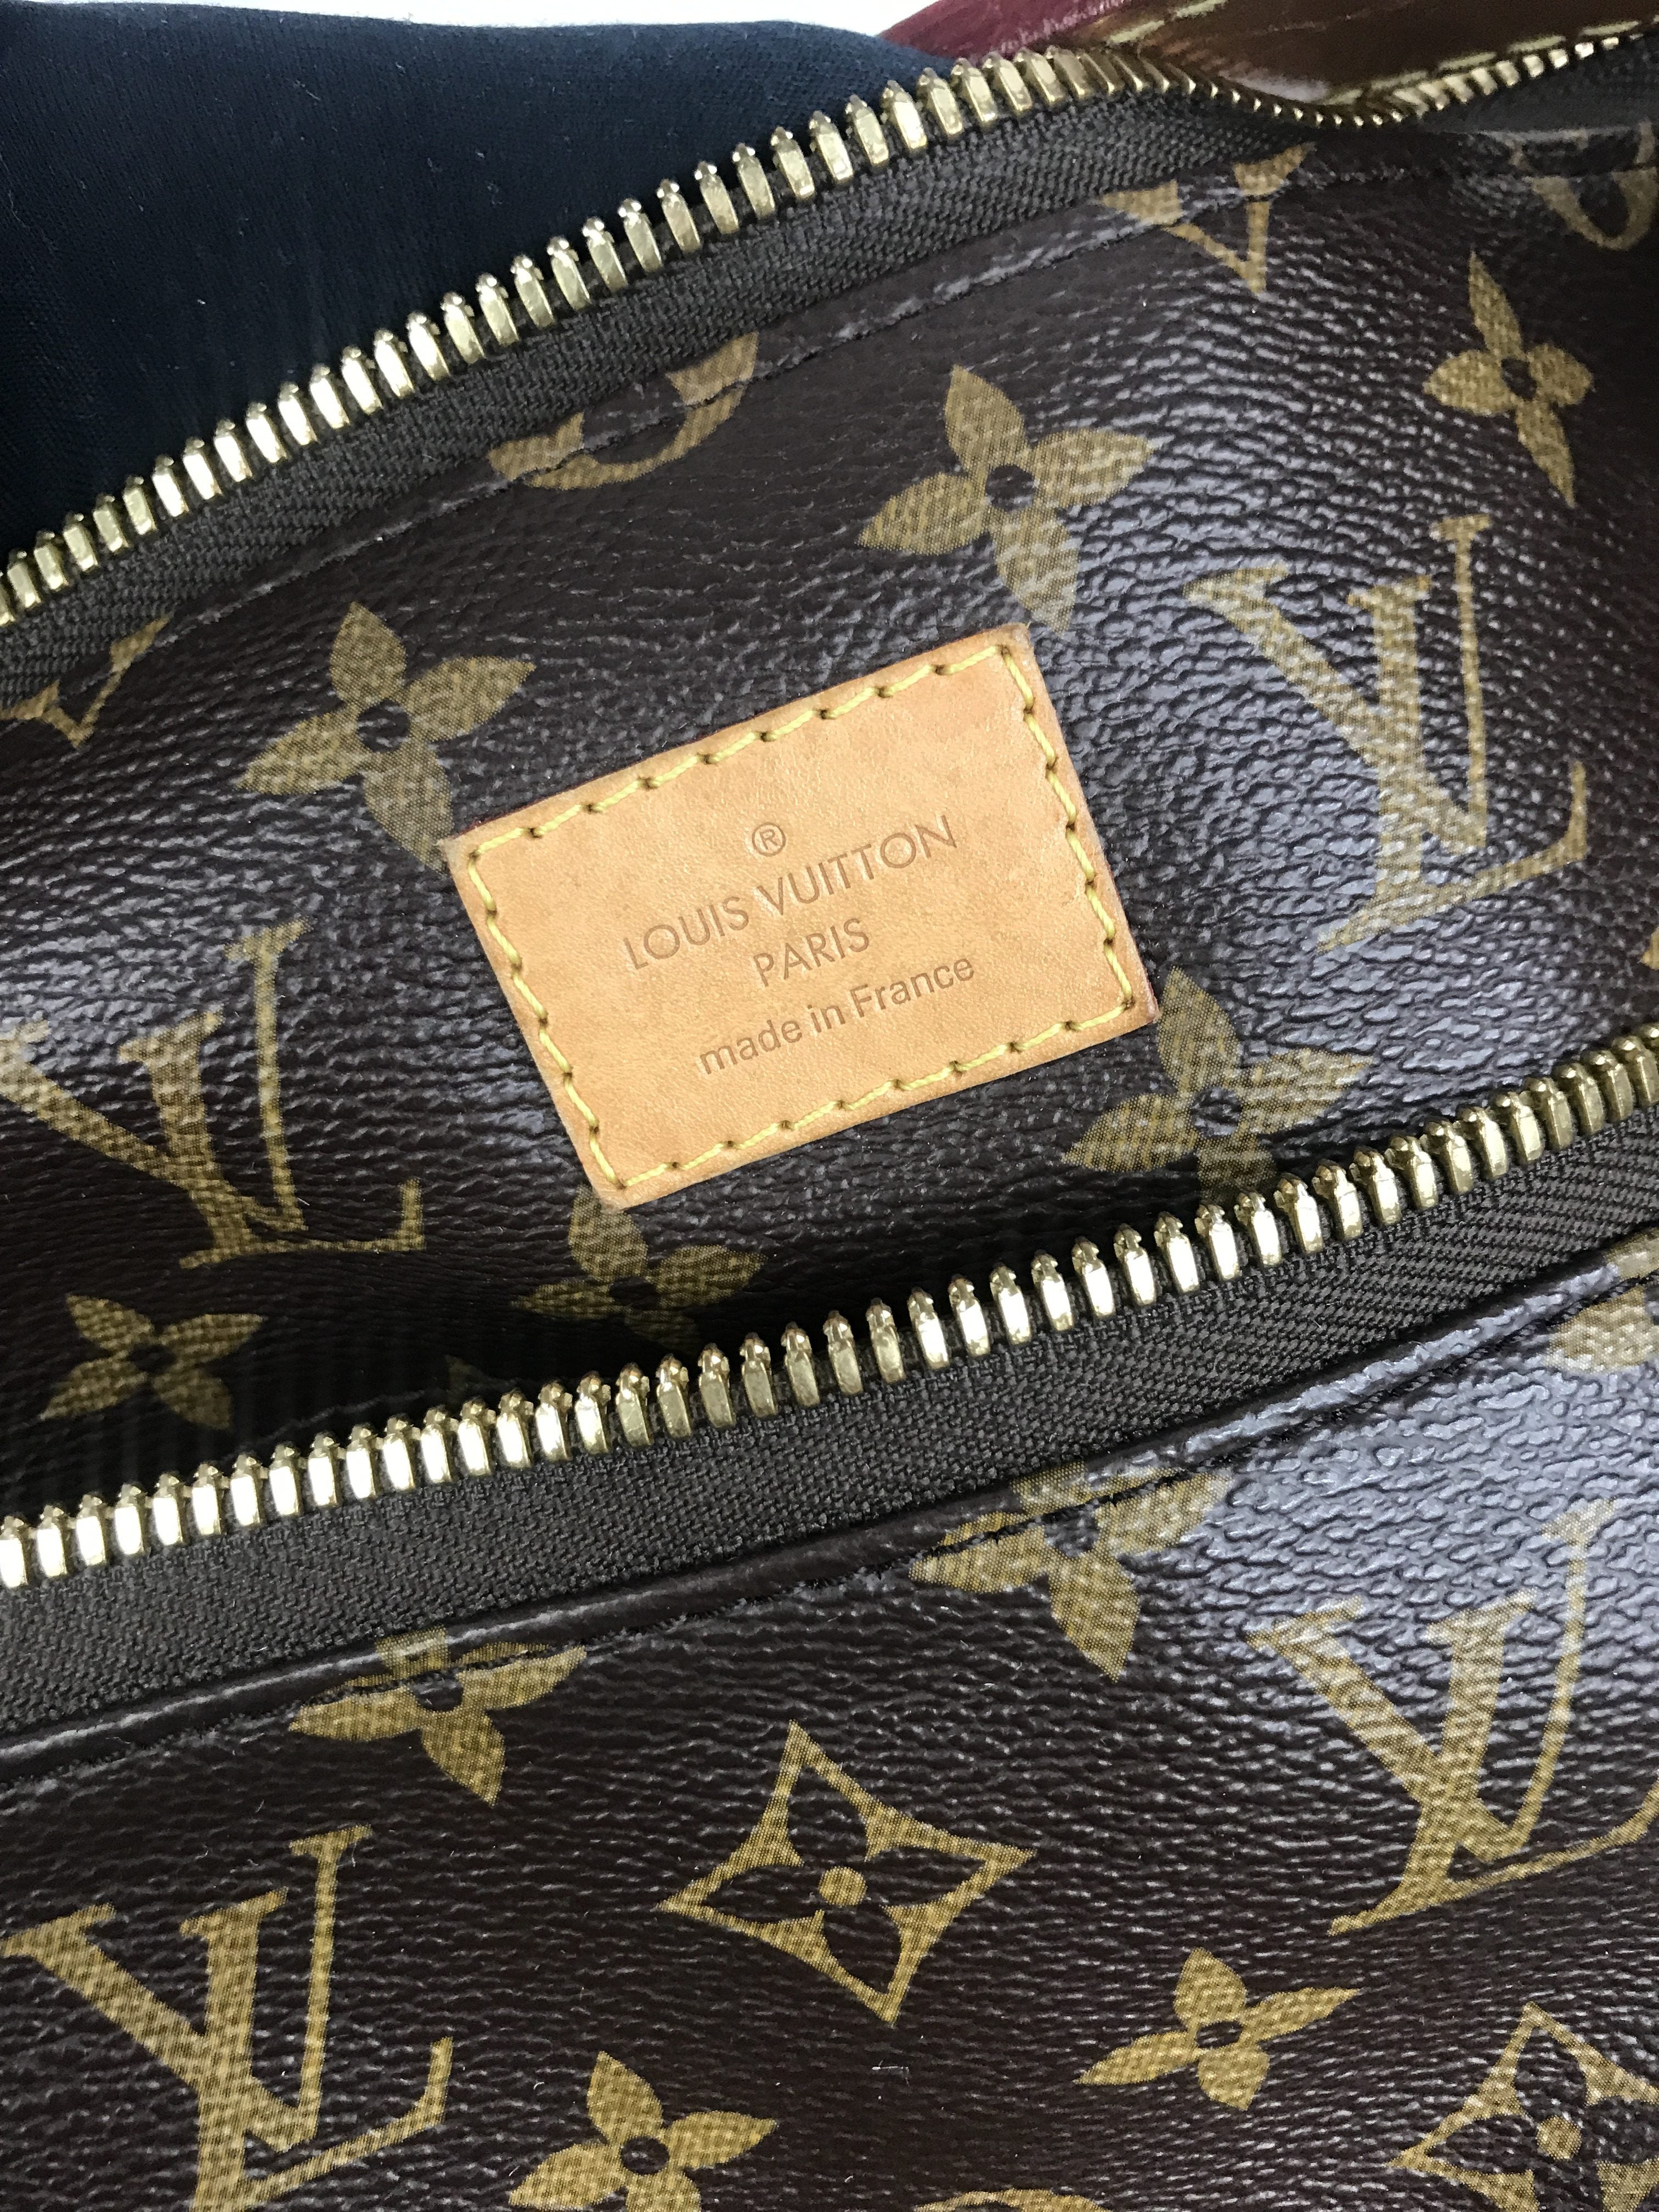 Monogram Coated Canvas Sully MM Bag W/GHW